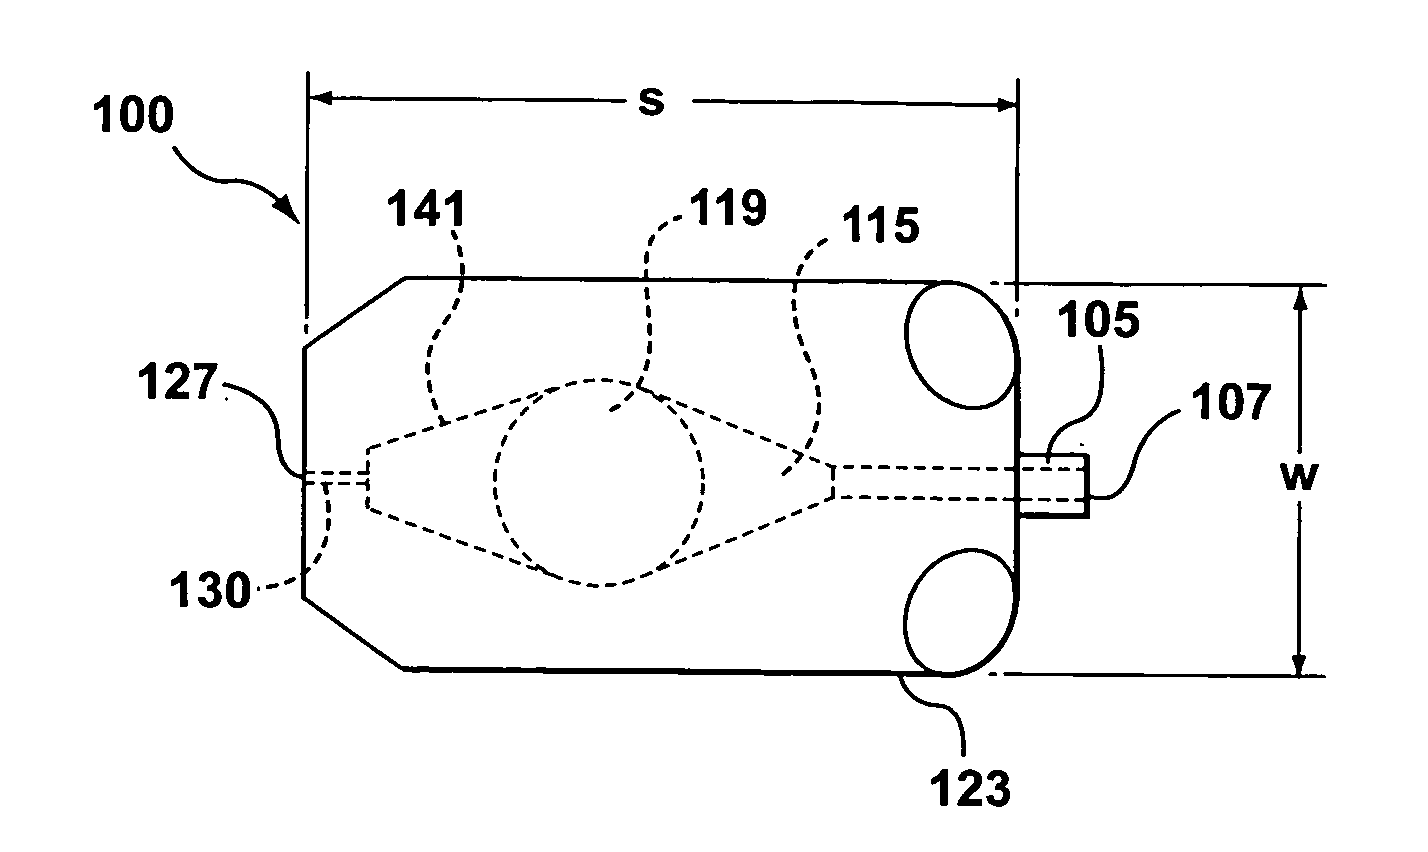 Blood collection and measurement apparatus